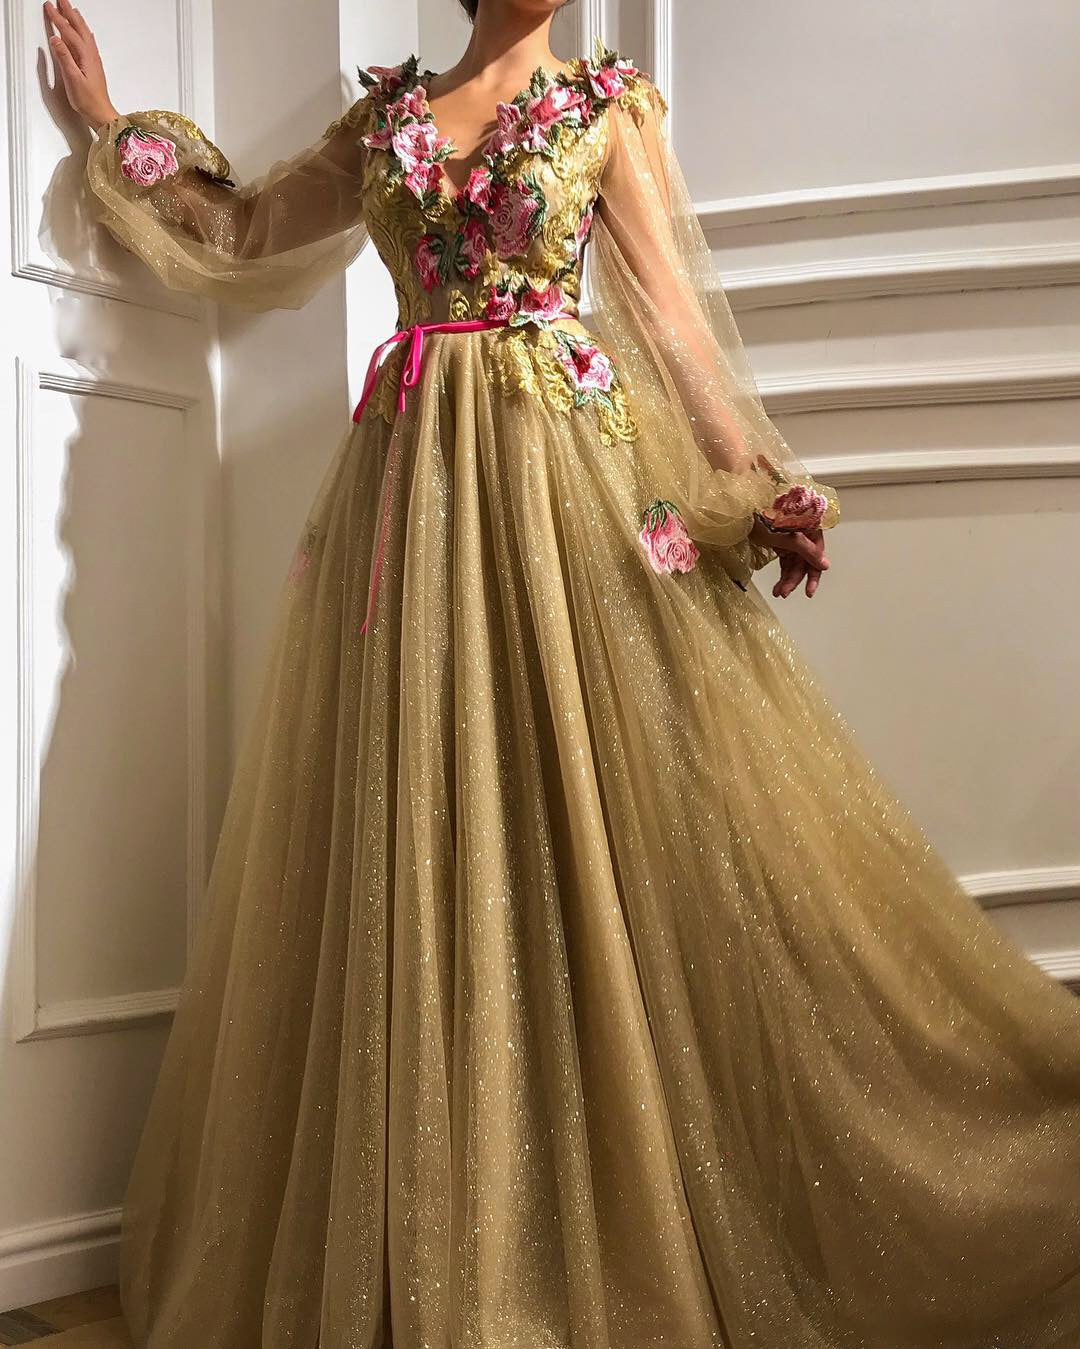 Gold A-Line dress with long sleeves, v-neck and embroidery